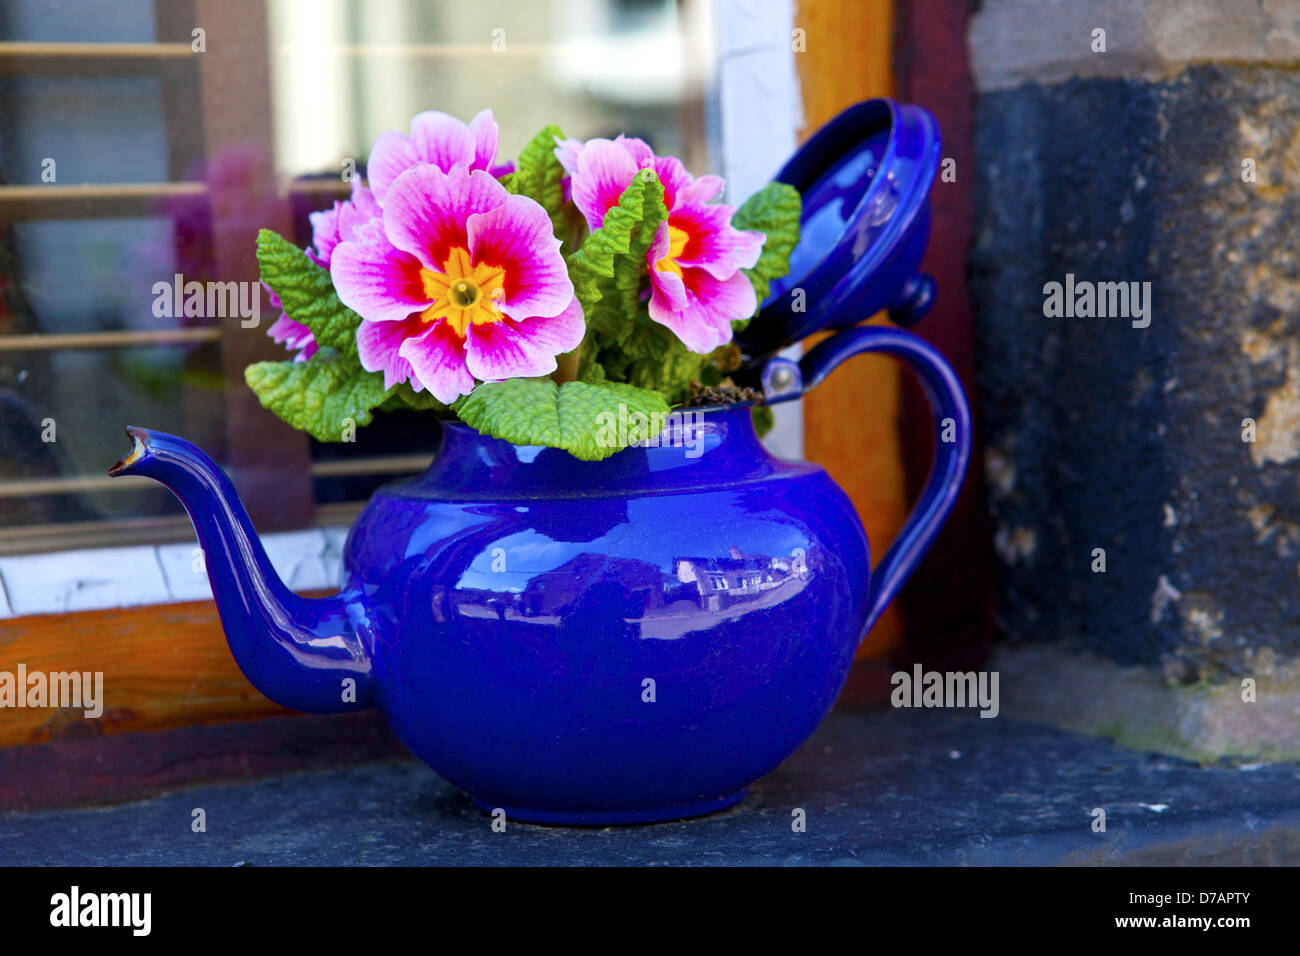 https://c8.alamy.com/comp/D7APTY/pink-primula-plant-in-an-old-teapot-on-a-windowsill-of-an-english-D7APTY.jpg